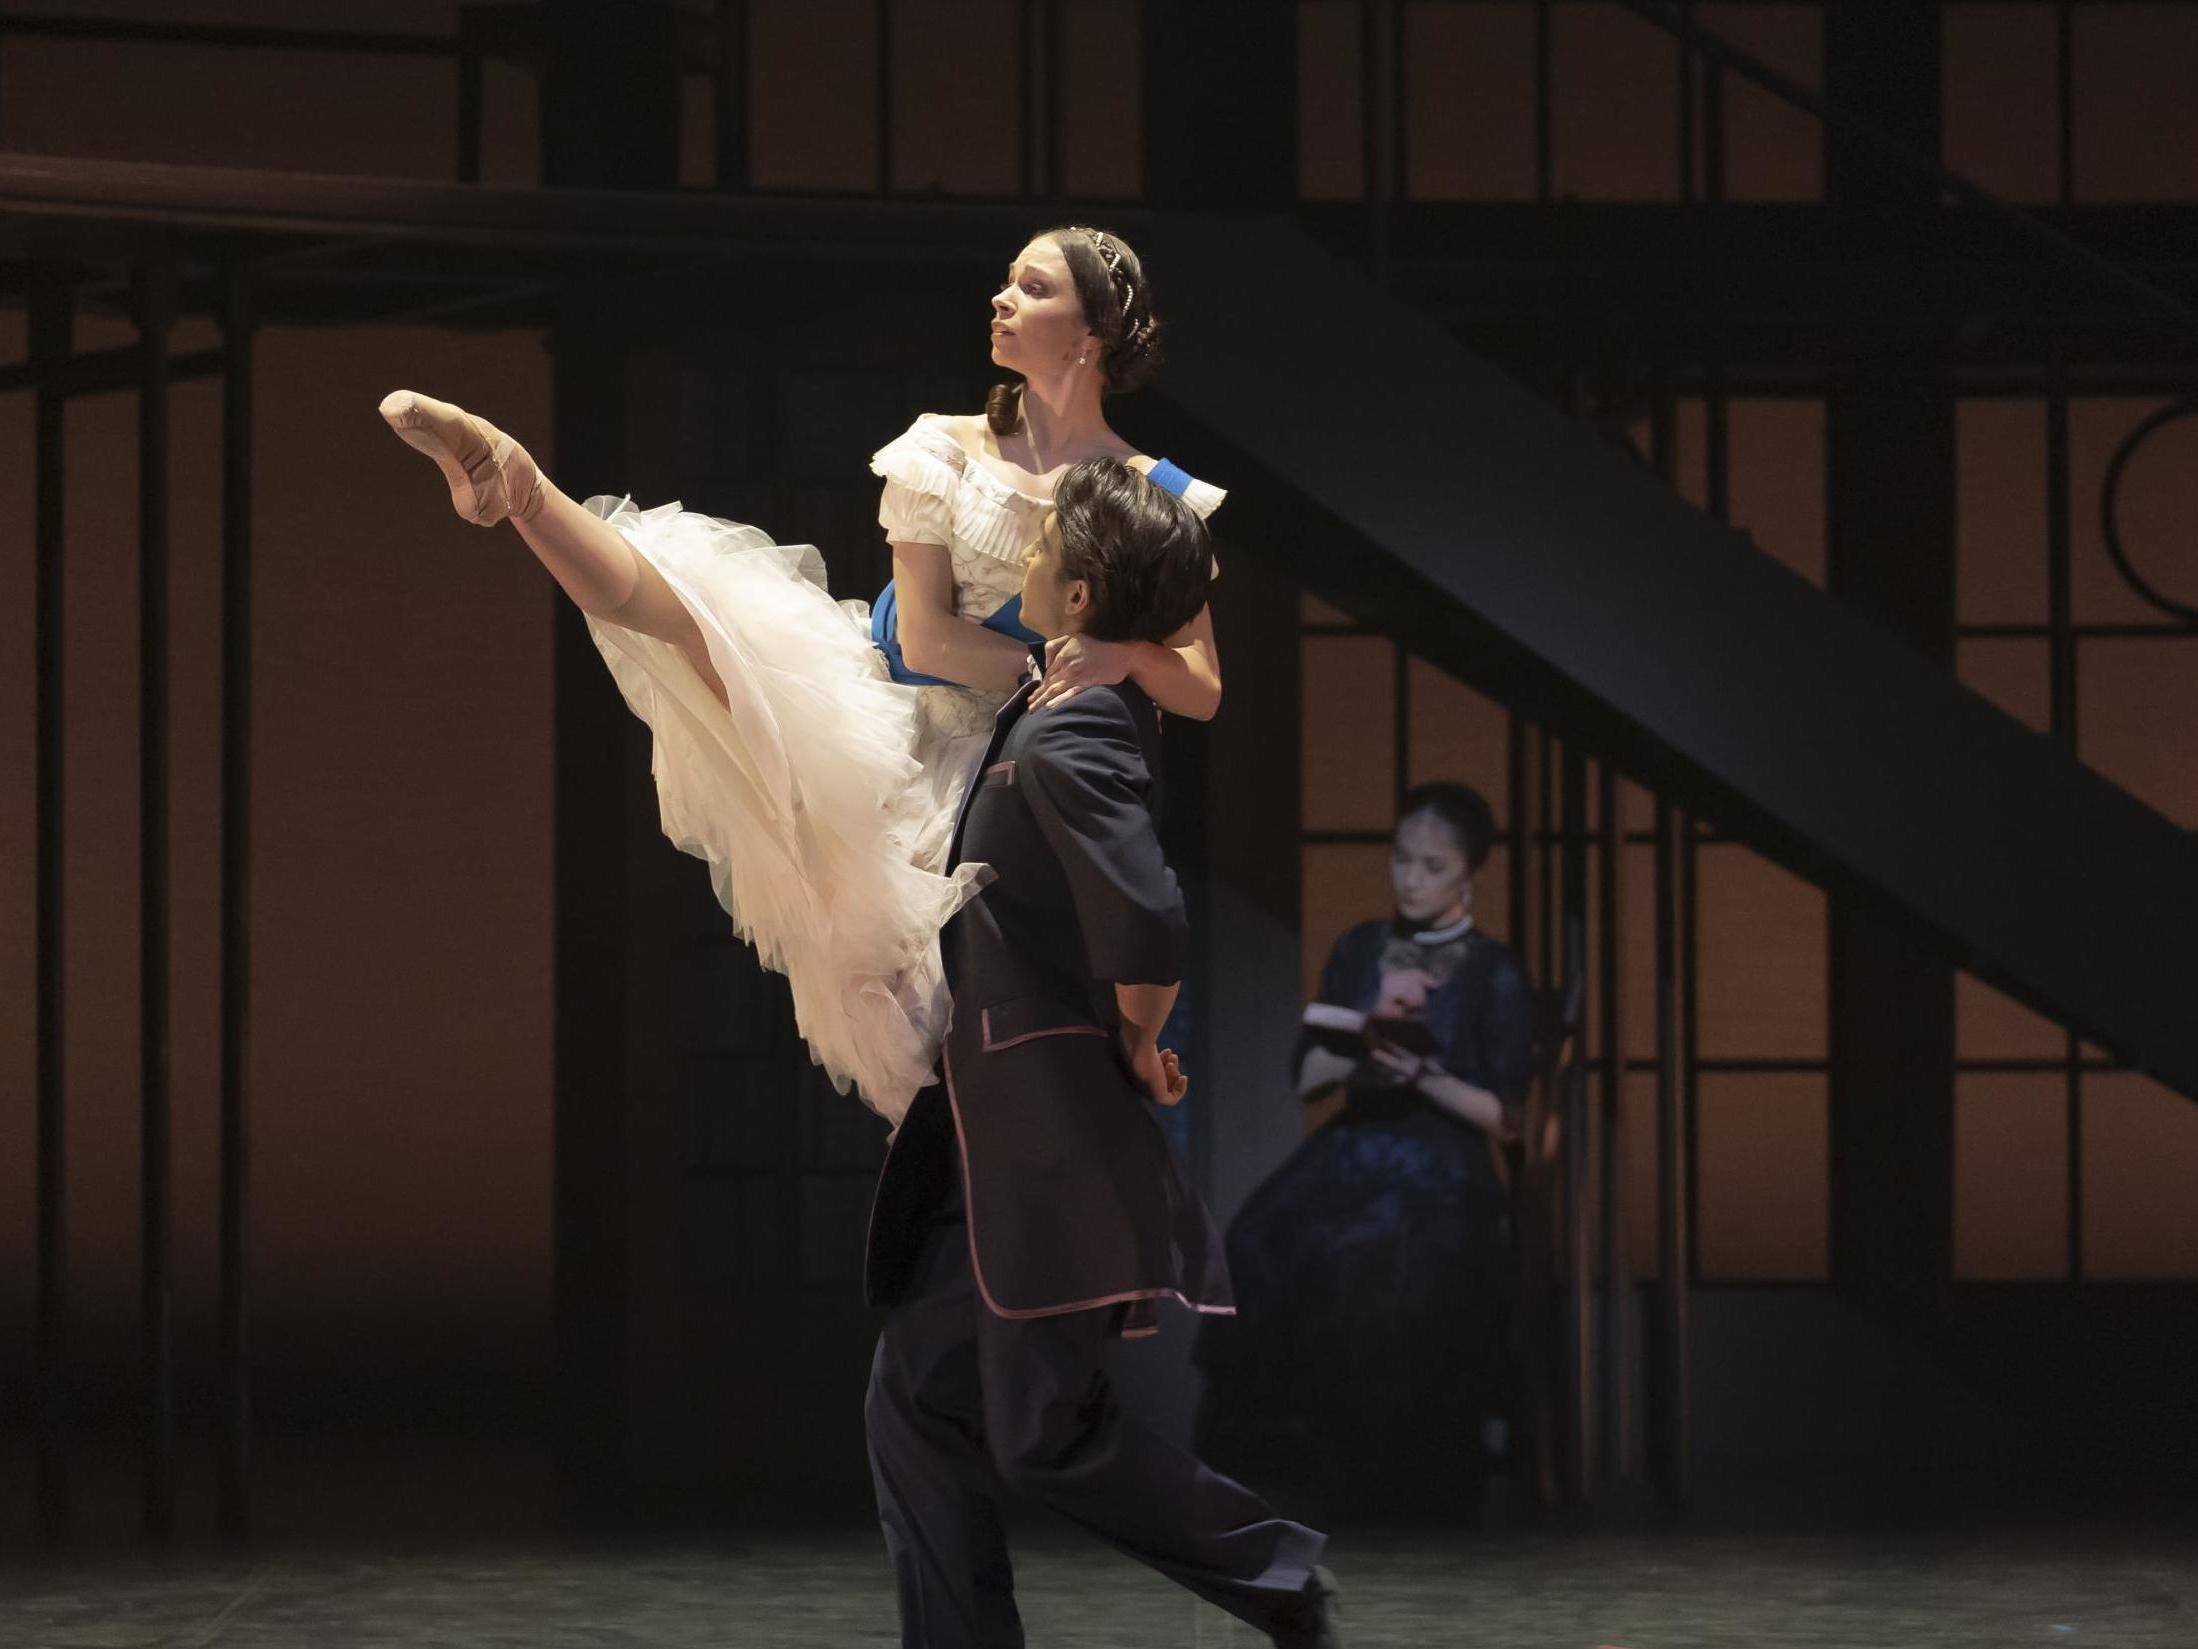 Abigail Prudames as Victoria with Riku Ito as Lord Melbourne